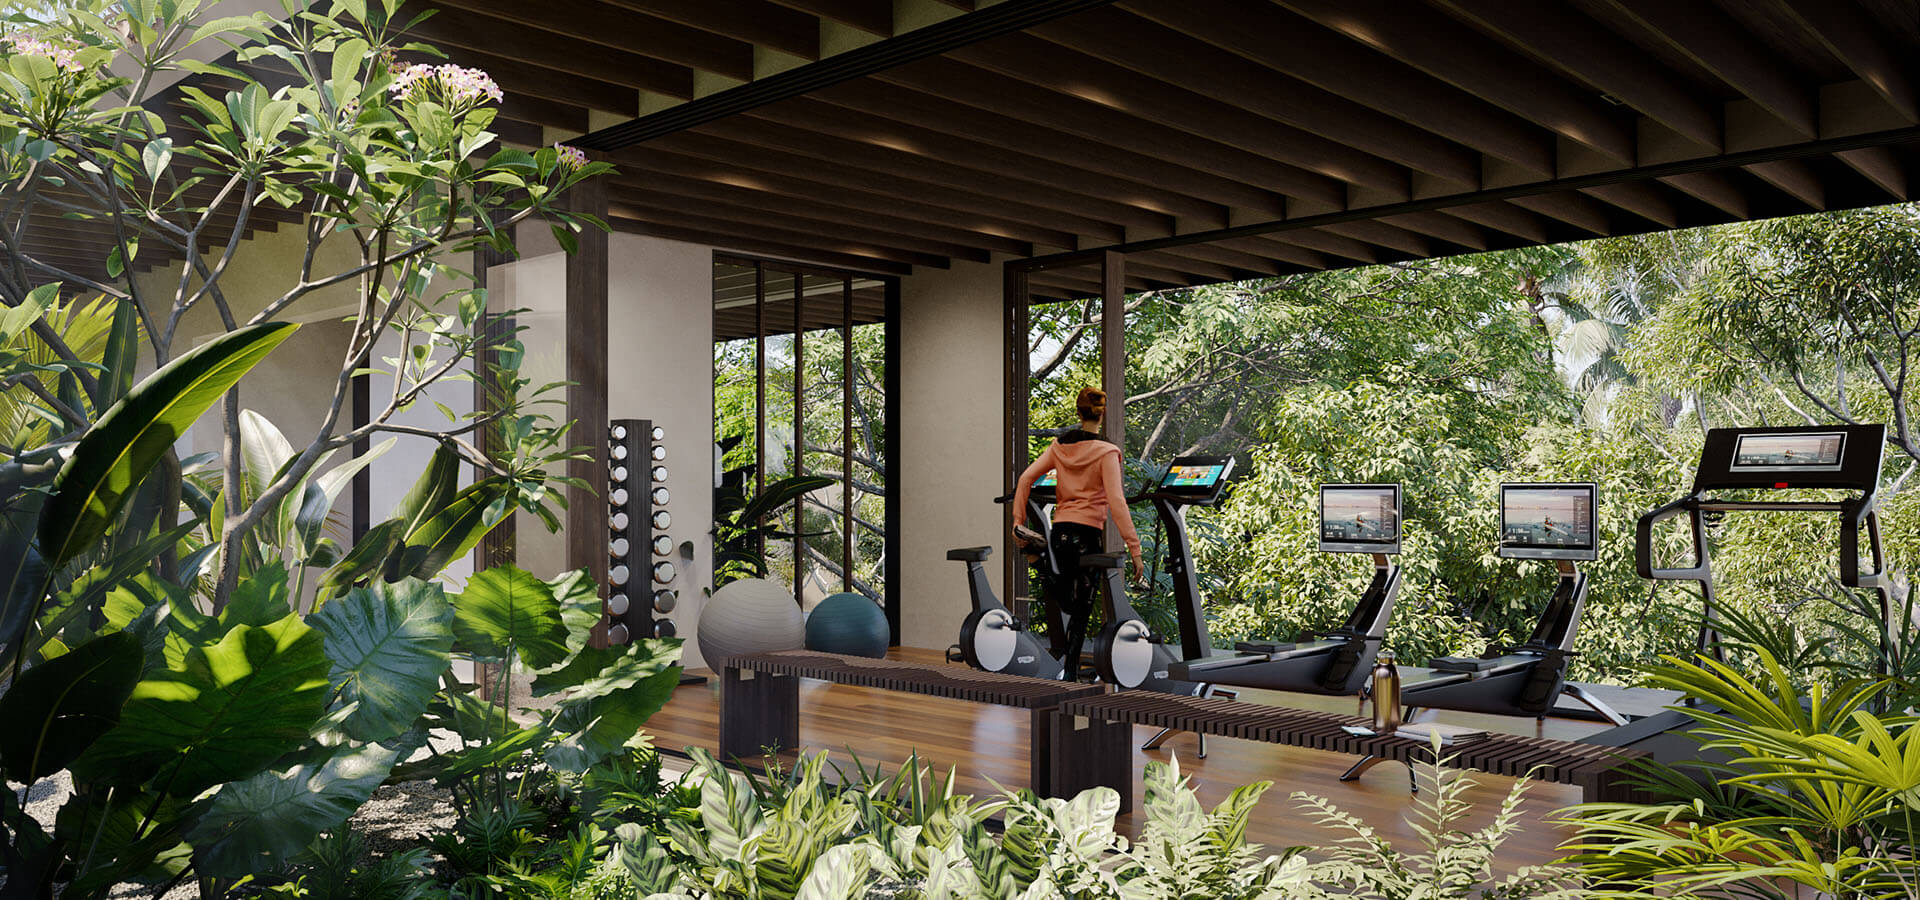 Gym at Acquarello Dominical. Surrounded by nature and fresh air